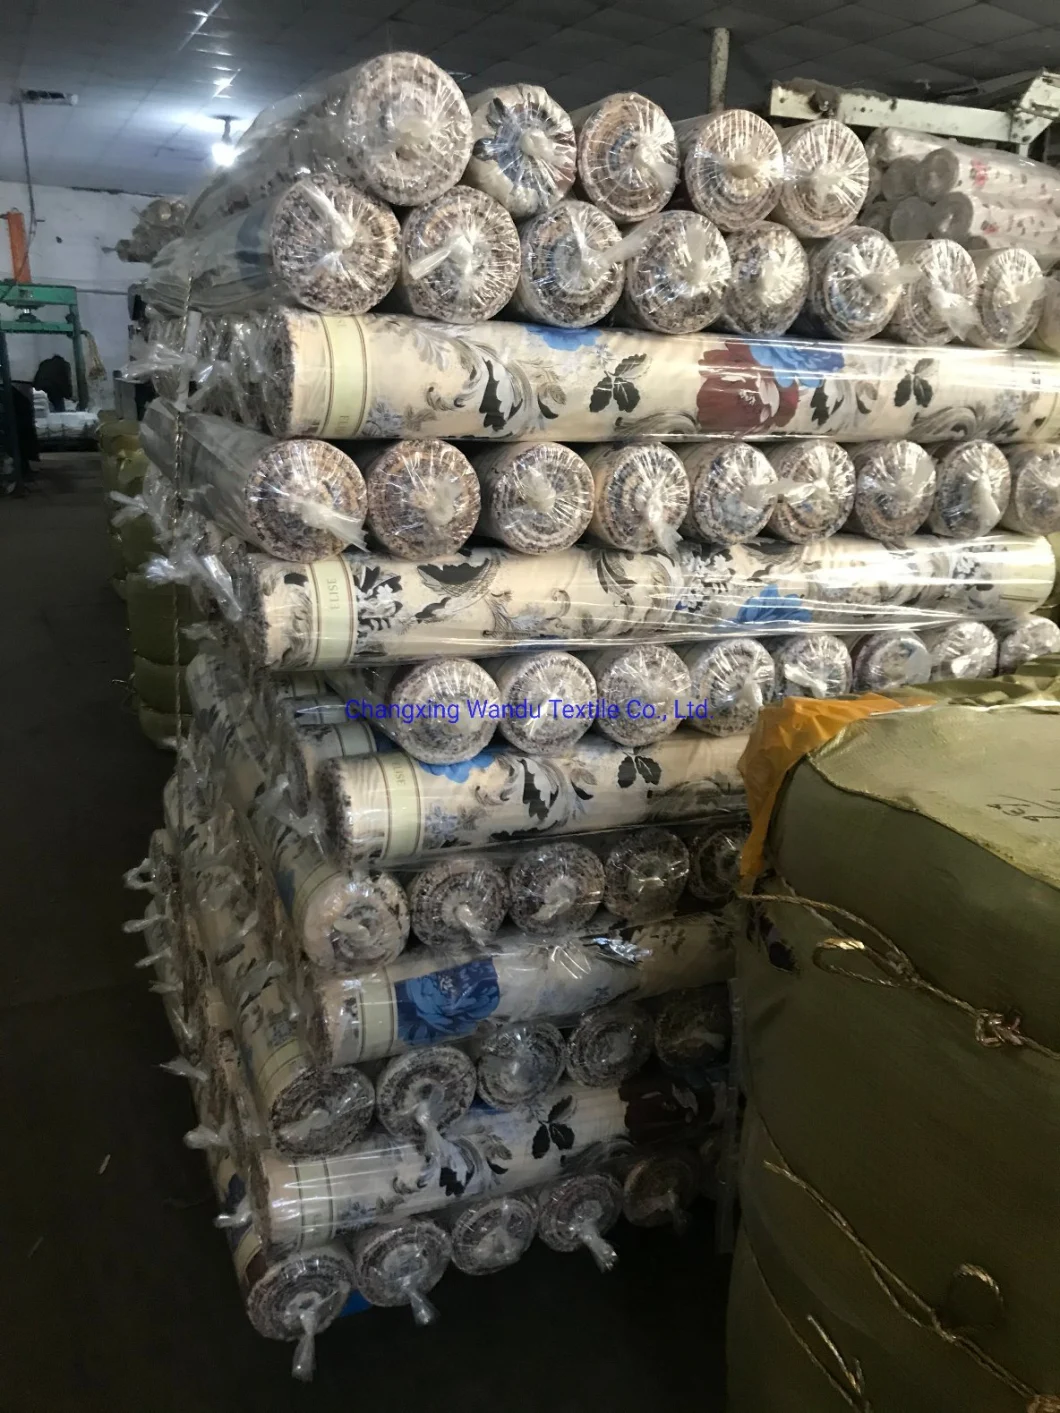 Cartoon Printing All Polyester Fabric Printing Cloth, Good Quality. The Latest Export Orders to Africa, Textile China, Changxing Wandu Textile